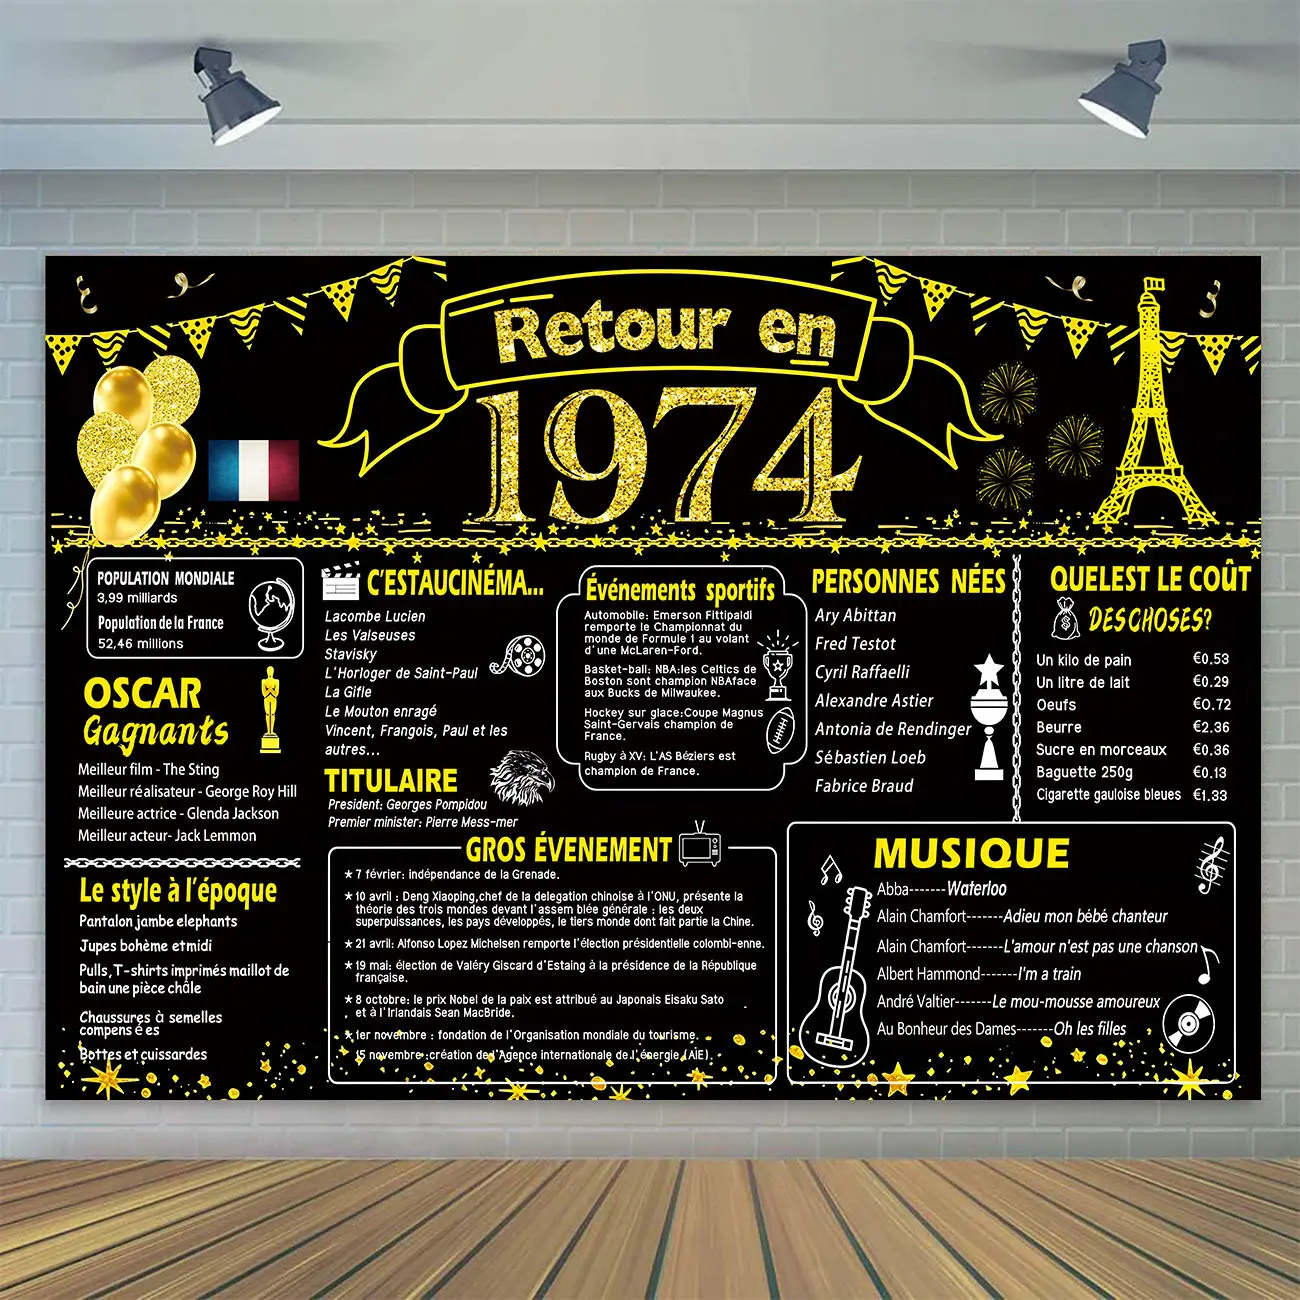 

Back in 1974 Backdrop 50th Birthday Party Decor Banner Poster Blue Pink Purple Black Gold Background for Women Men 50 Years Old